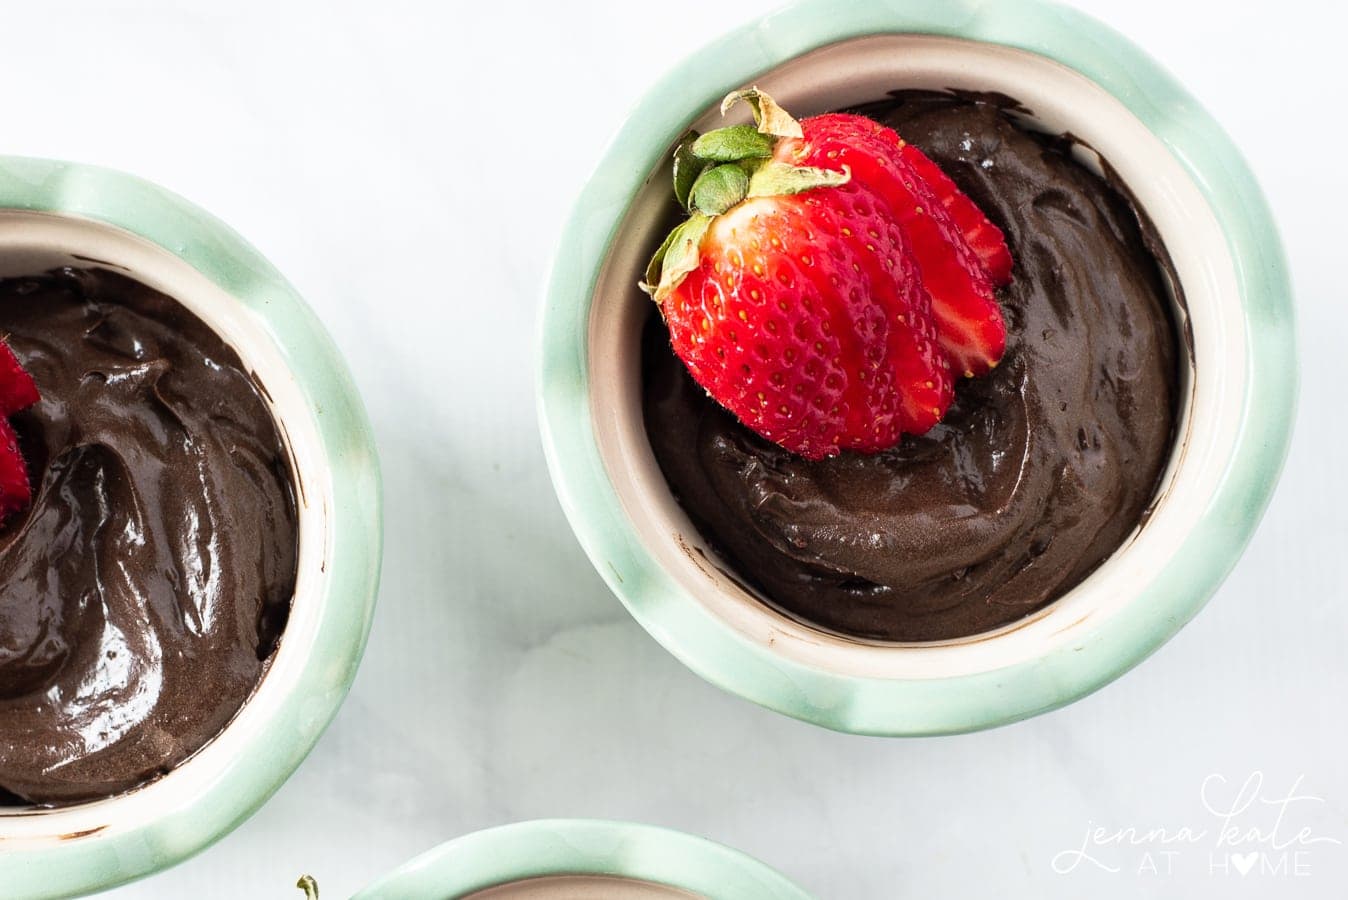 A delicious chocolate avocado pudding that can be made vegan or paleo